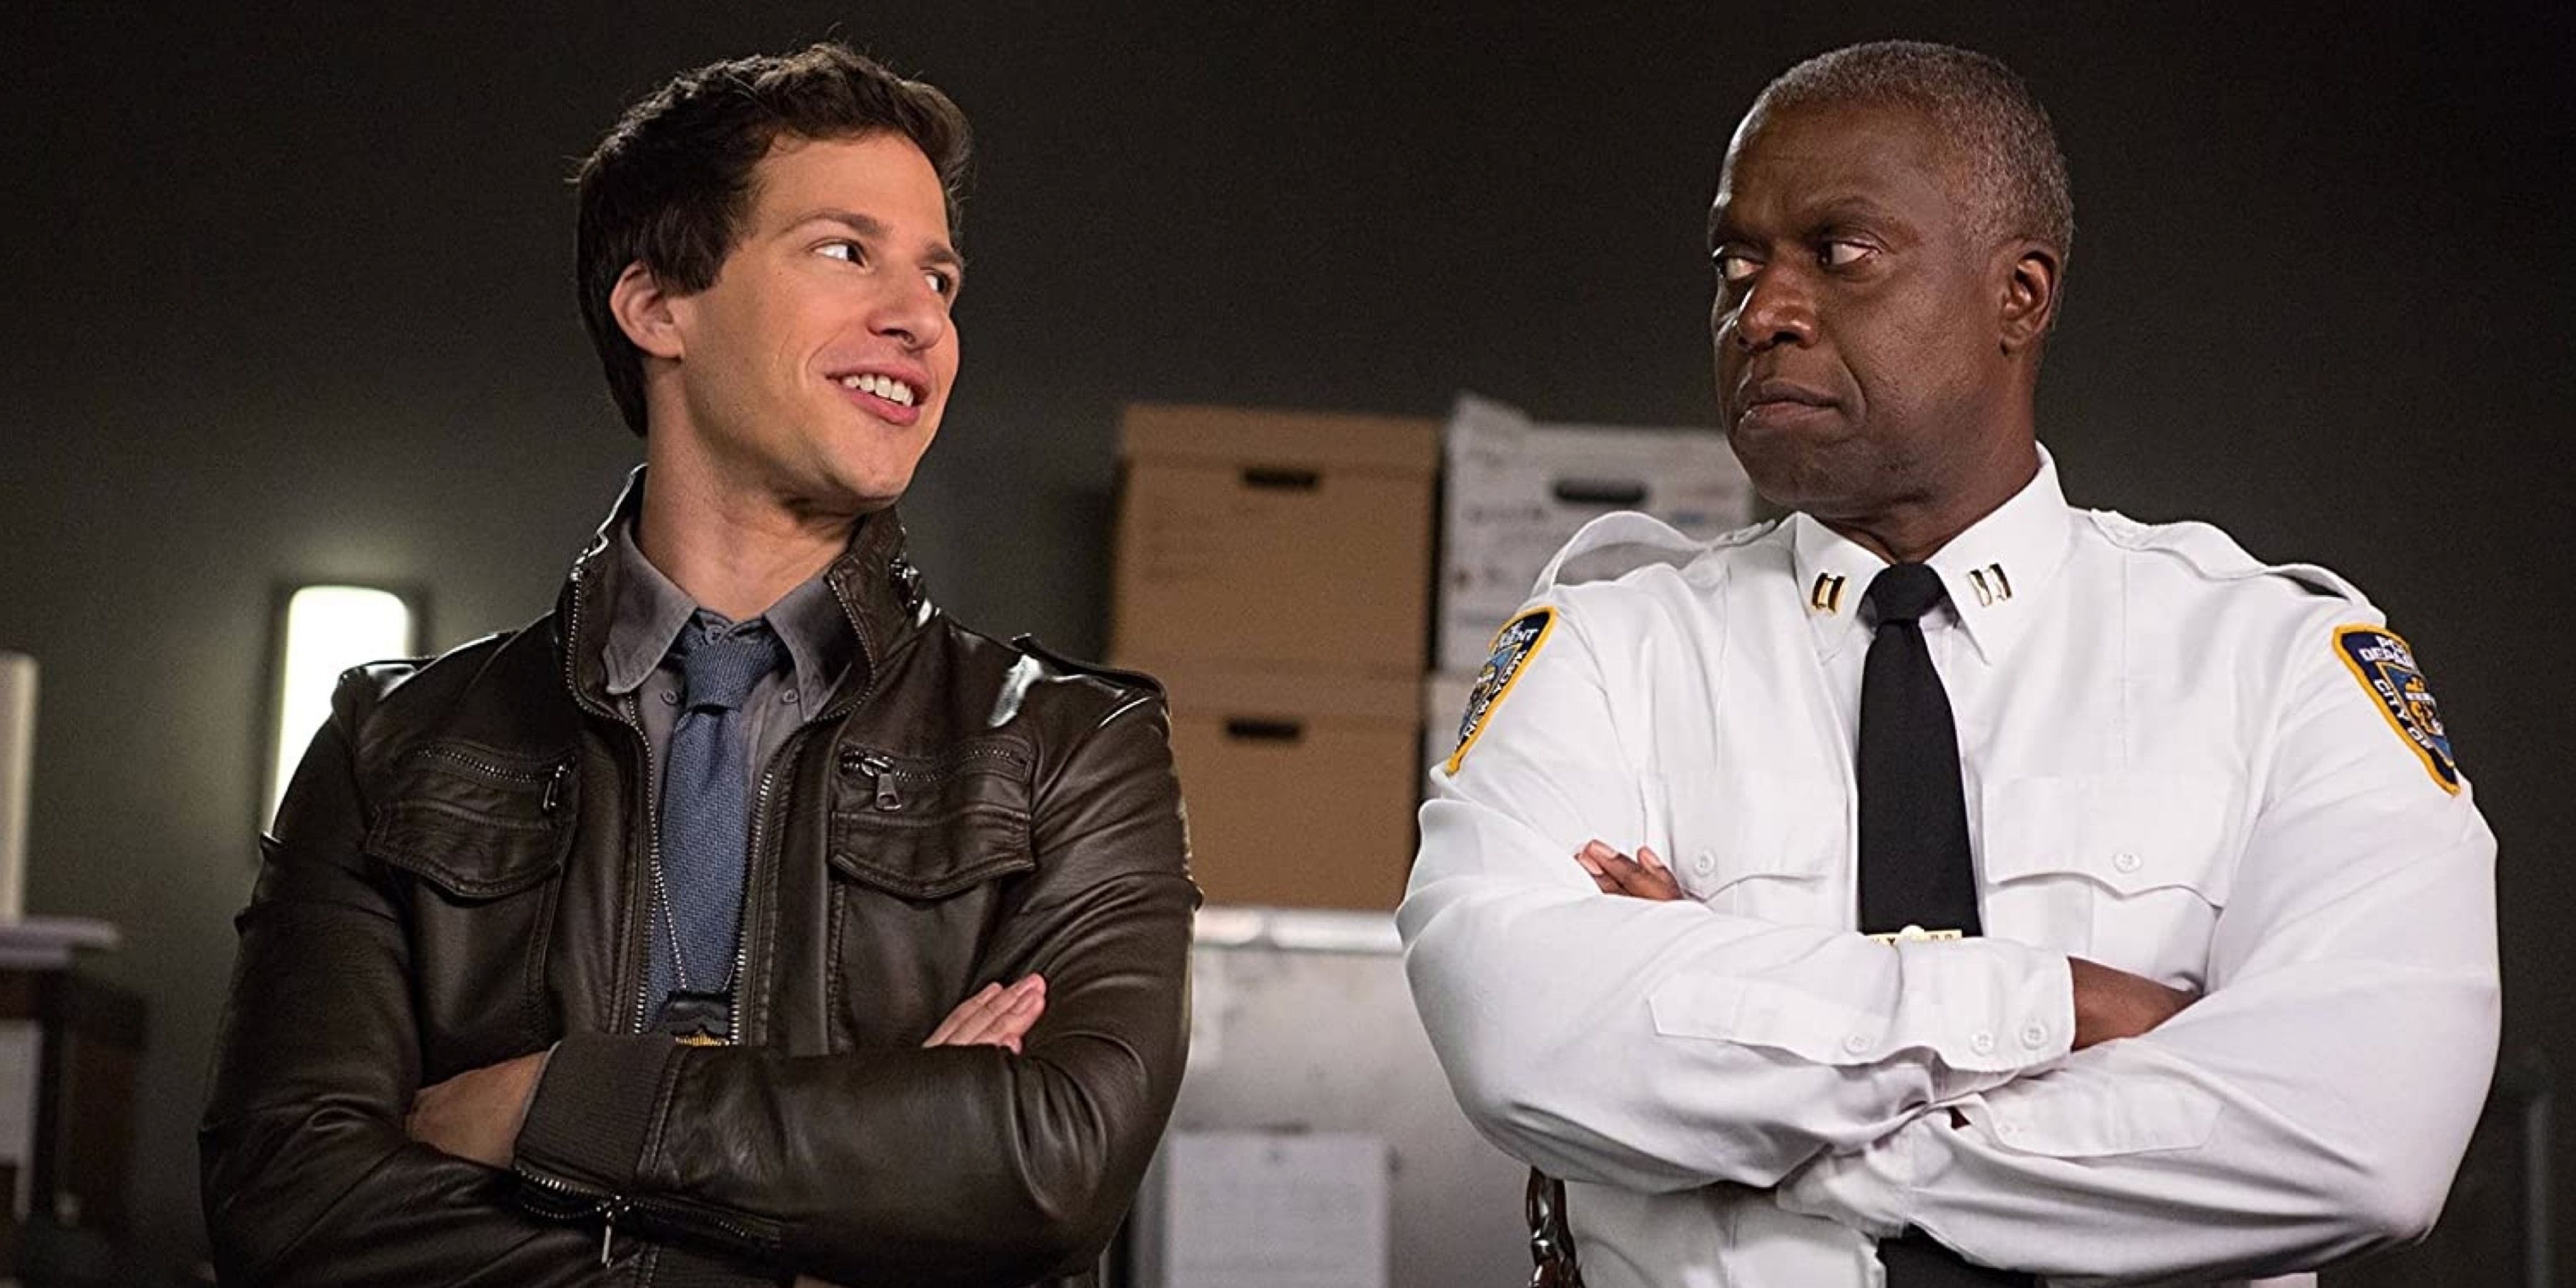 Brooklyn Nine-Nine characters Jake Peralta and Captain Holt with crossed arms, looking at each other